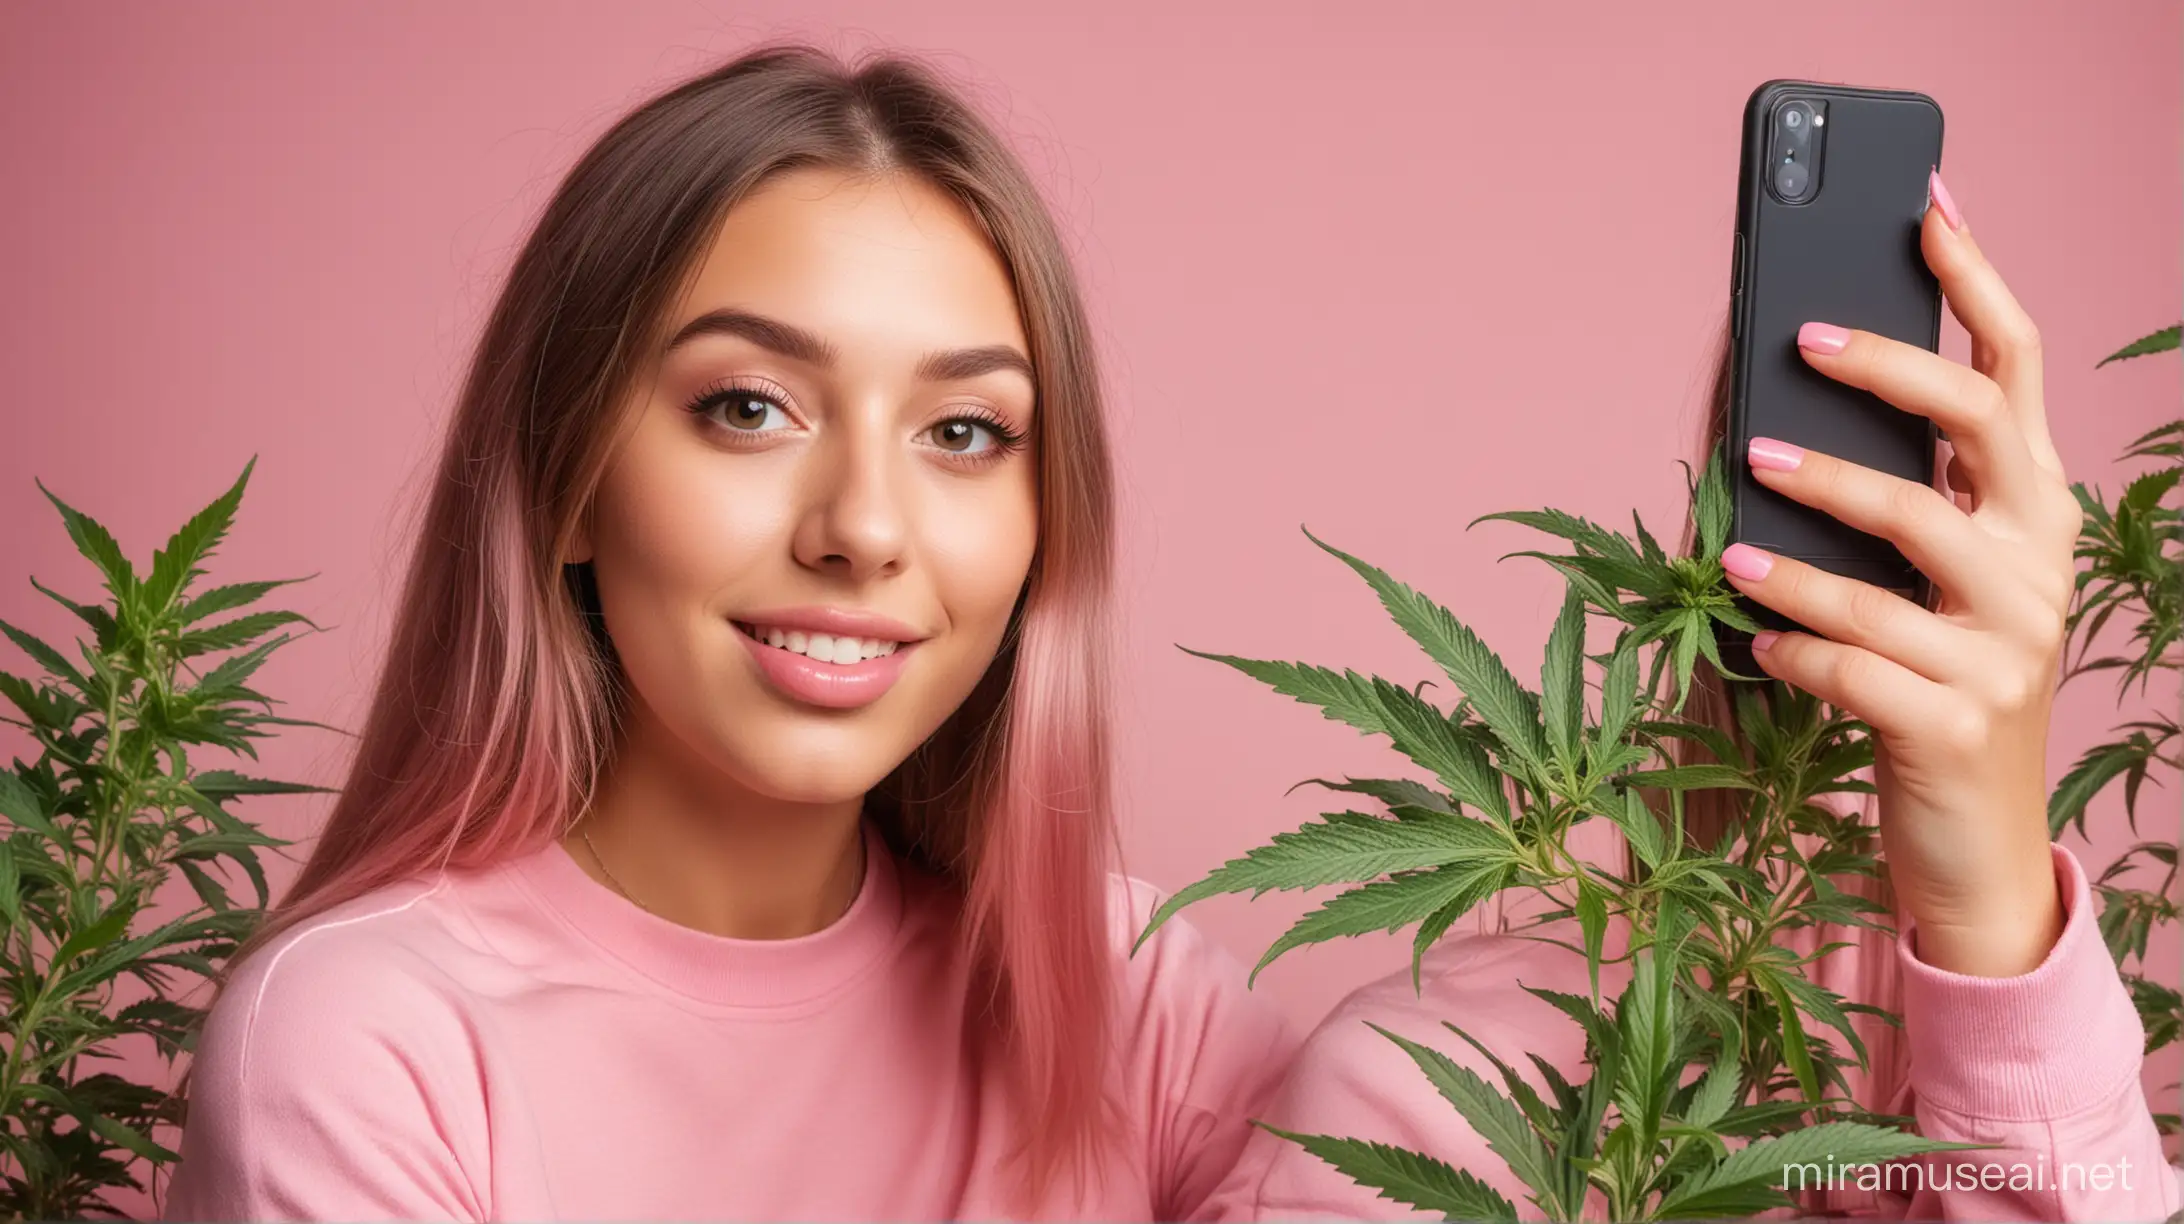 girl taking a selfie with Cannabis plant. using bubblegum pink and green in the photo